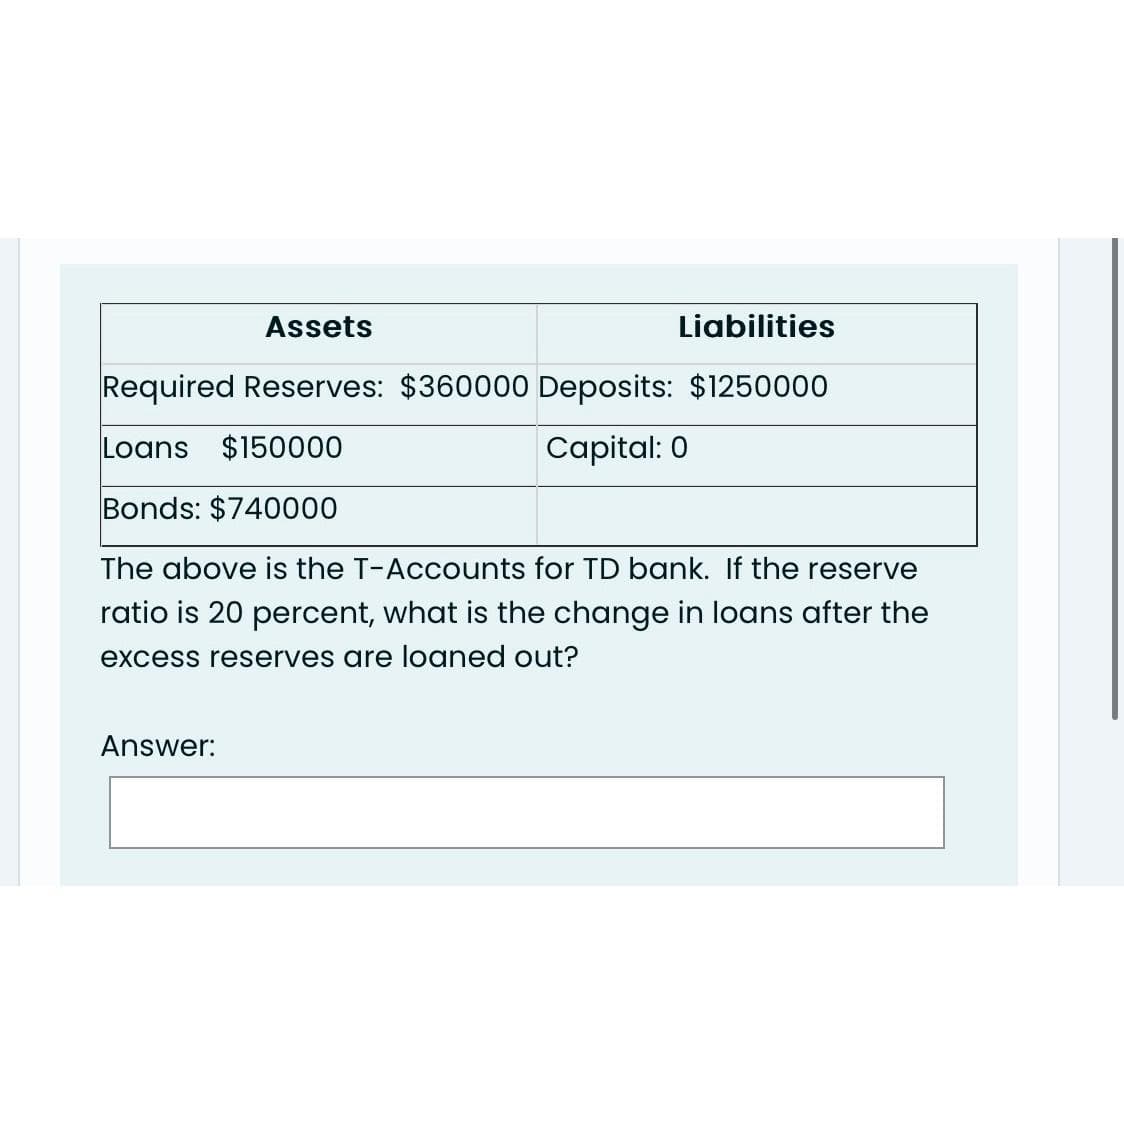 Assets
Liabilities
Required Reserves: $360000 Deposits: $1250000
Loans $150000
Capital: 0
Bonds: $740000
The above is the T-Accounts for TD bank. If the reserve
ratio is 20 percent, what is the change in loans after the
excess reserves are loaned out?
Answer: